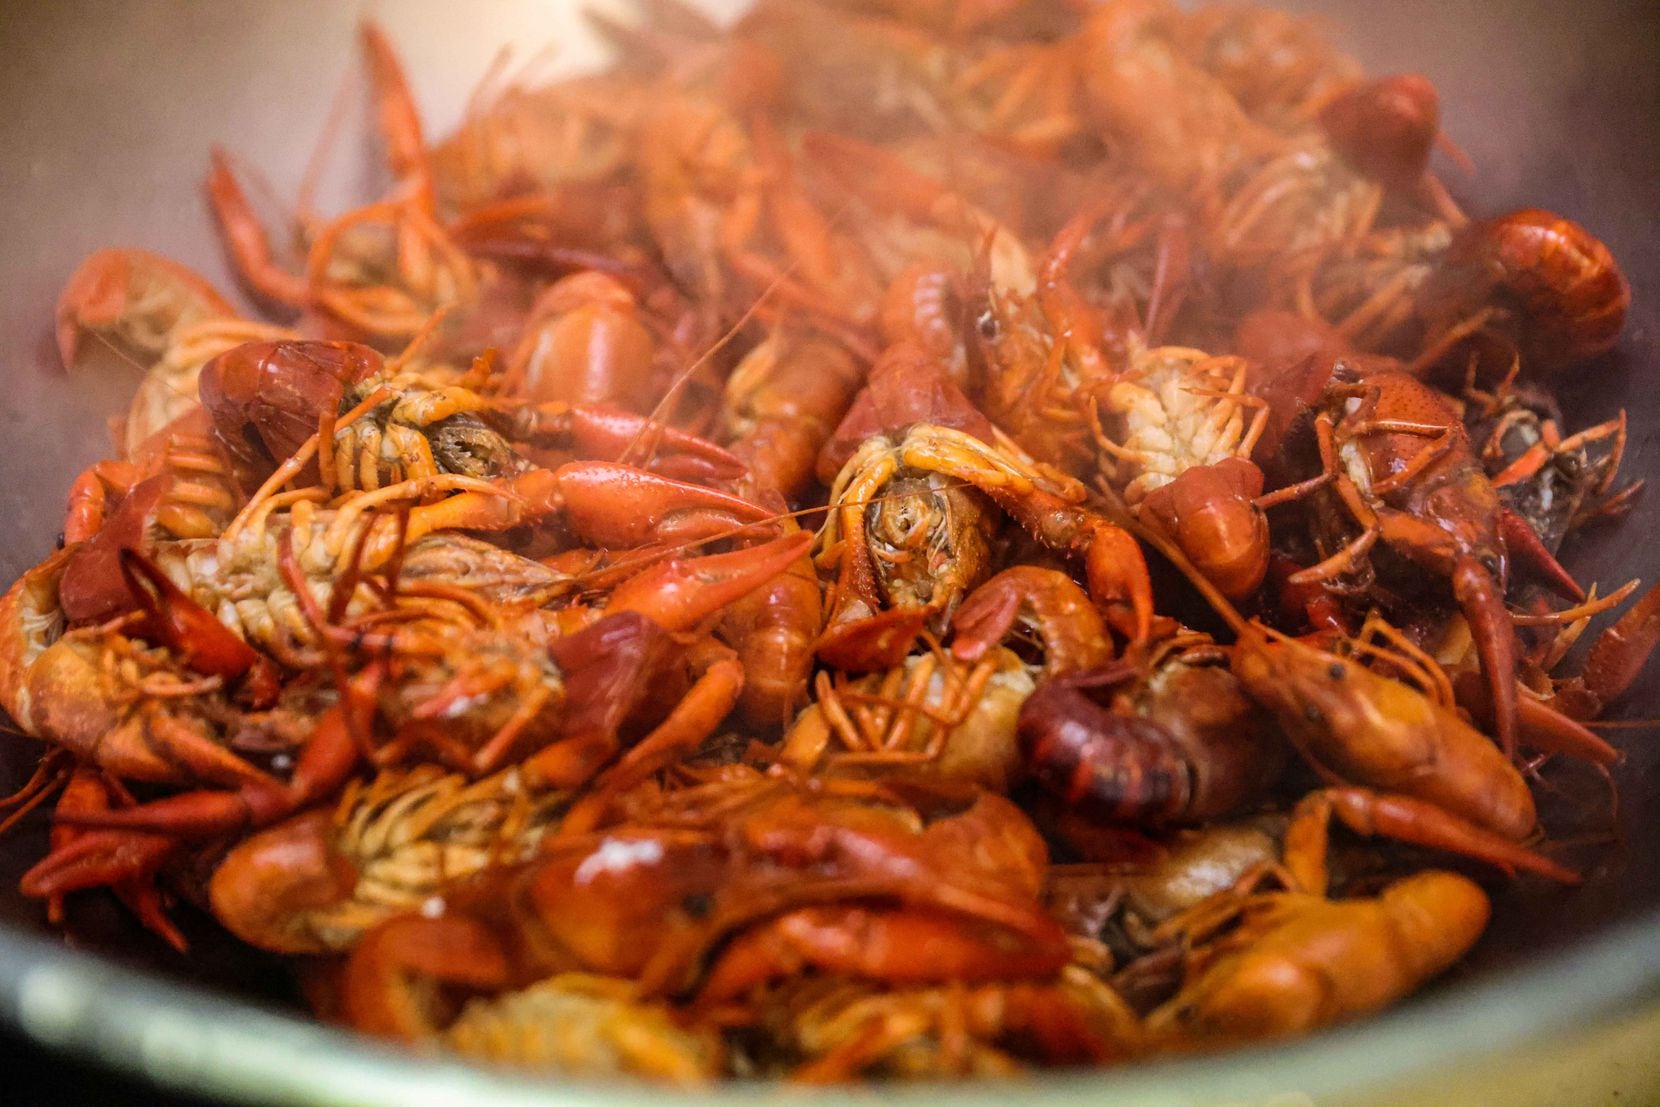 Many corporations are not hosting crawfish boils in 2021 because of the coronavirus...